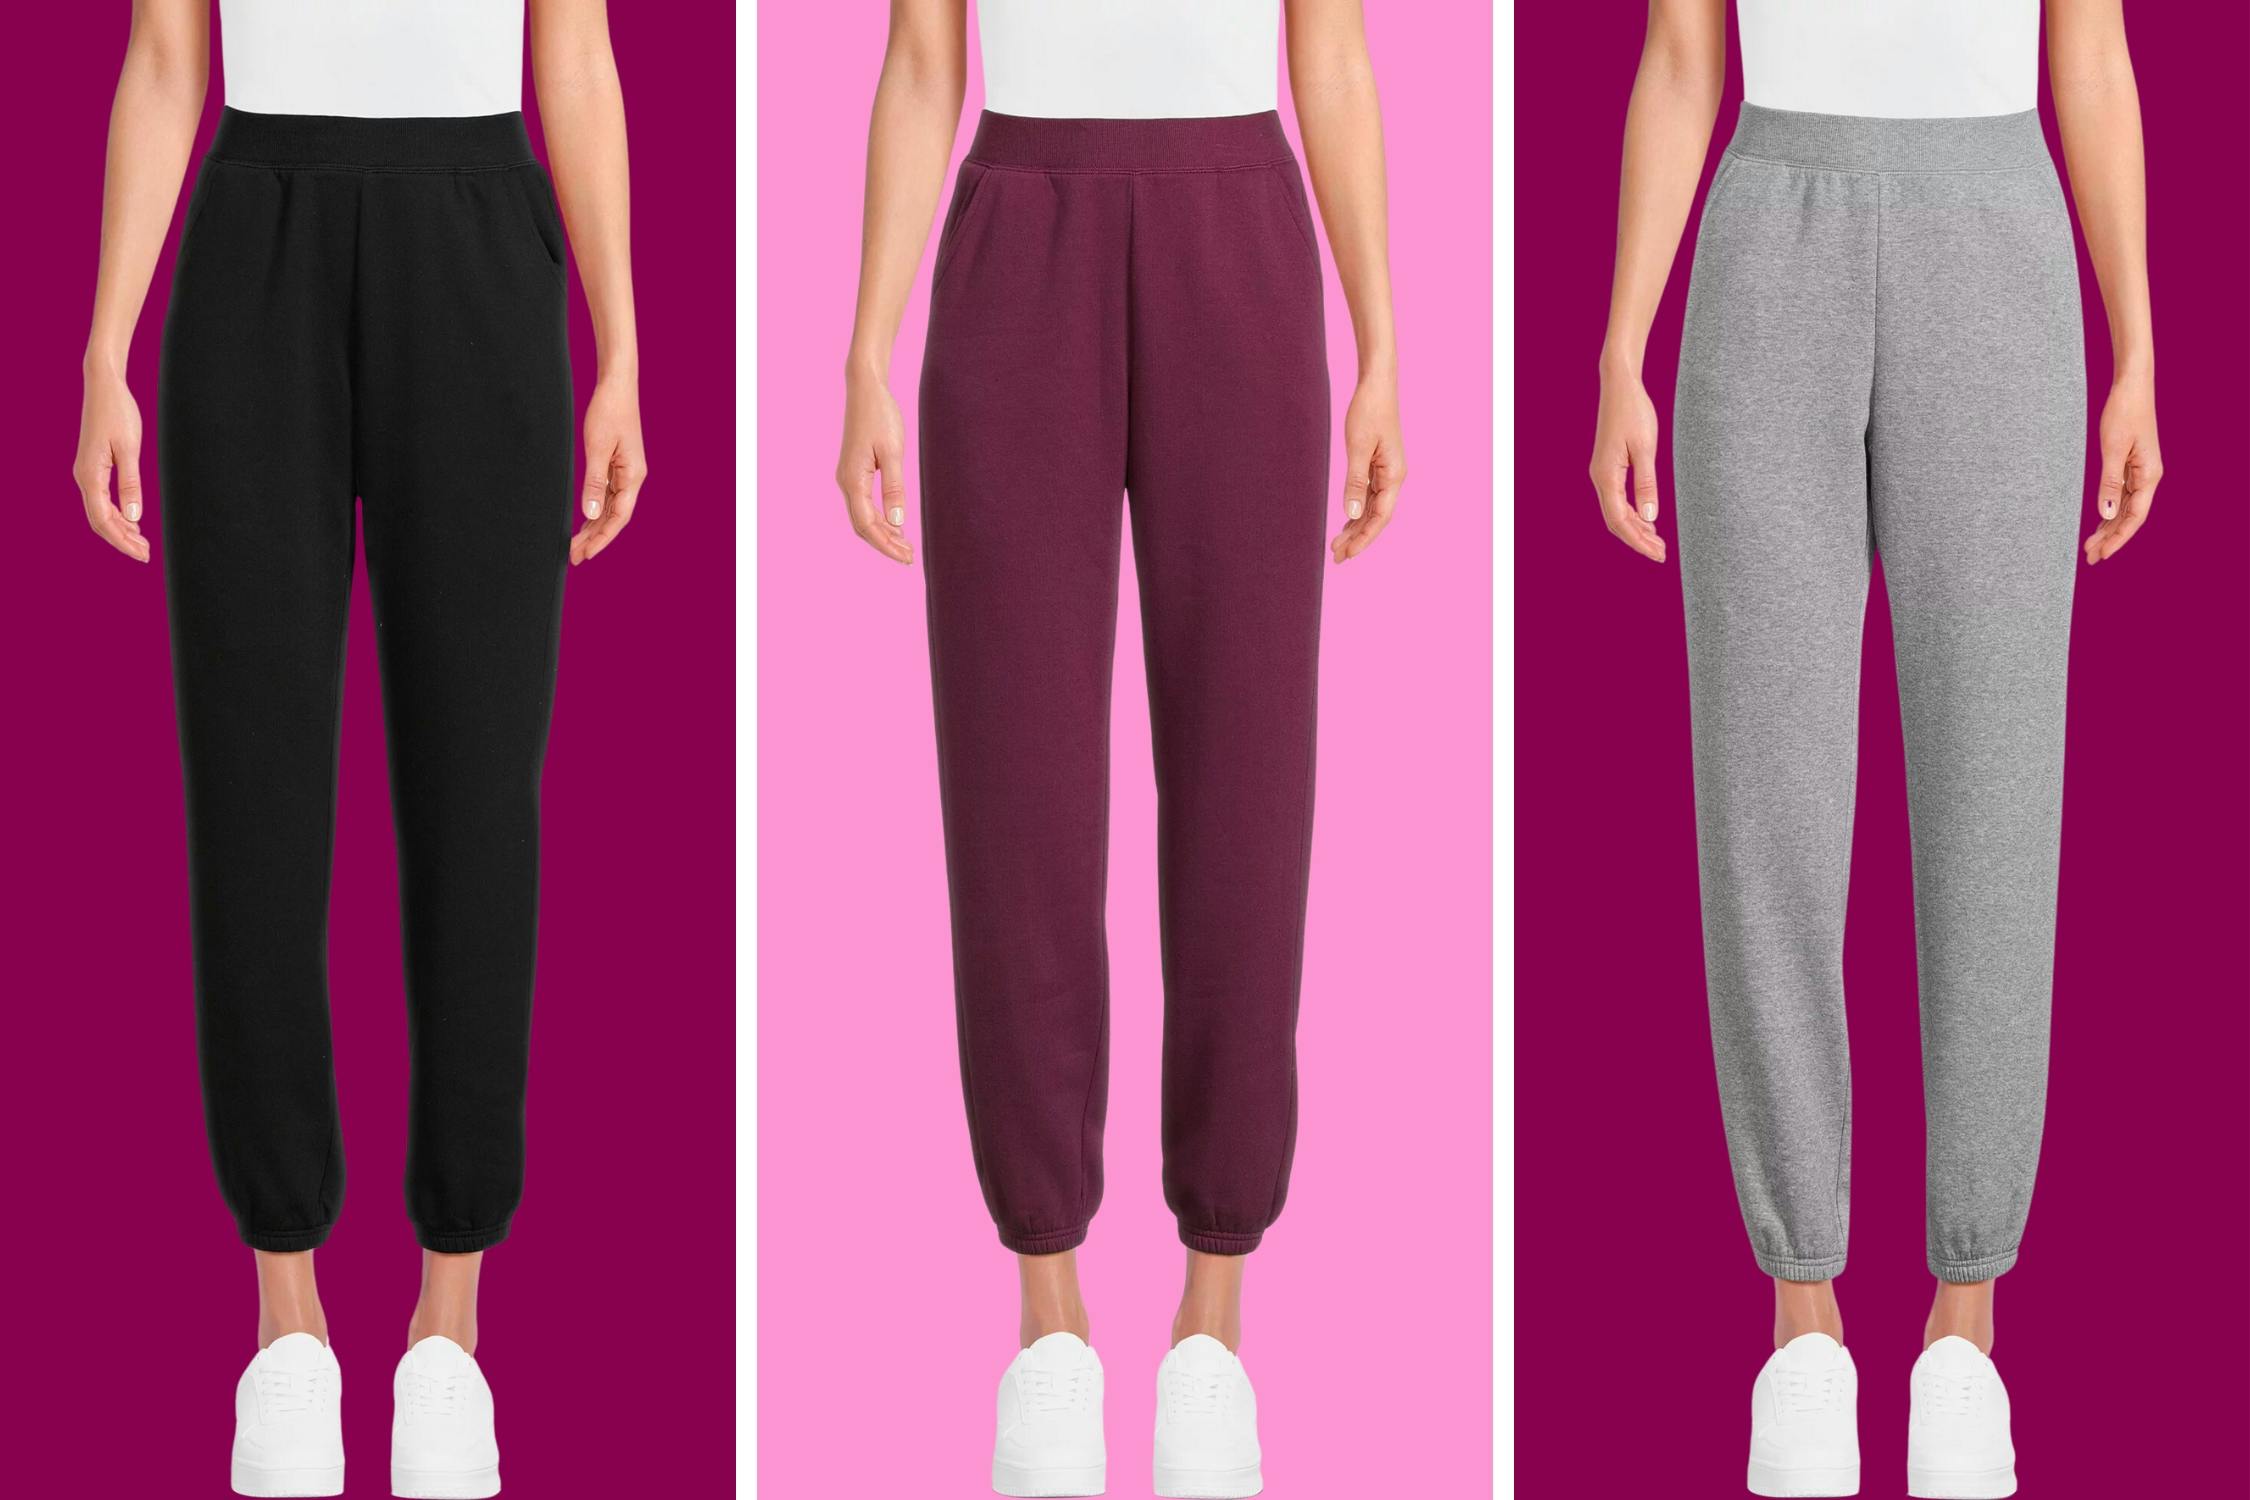 Low-Priced Women's Joggers at Walmart — Pay Just $8 - The Krazy Coupon Lady